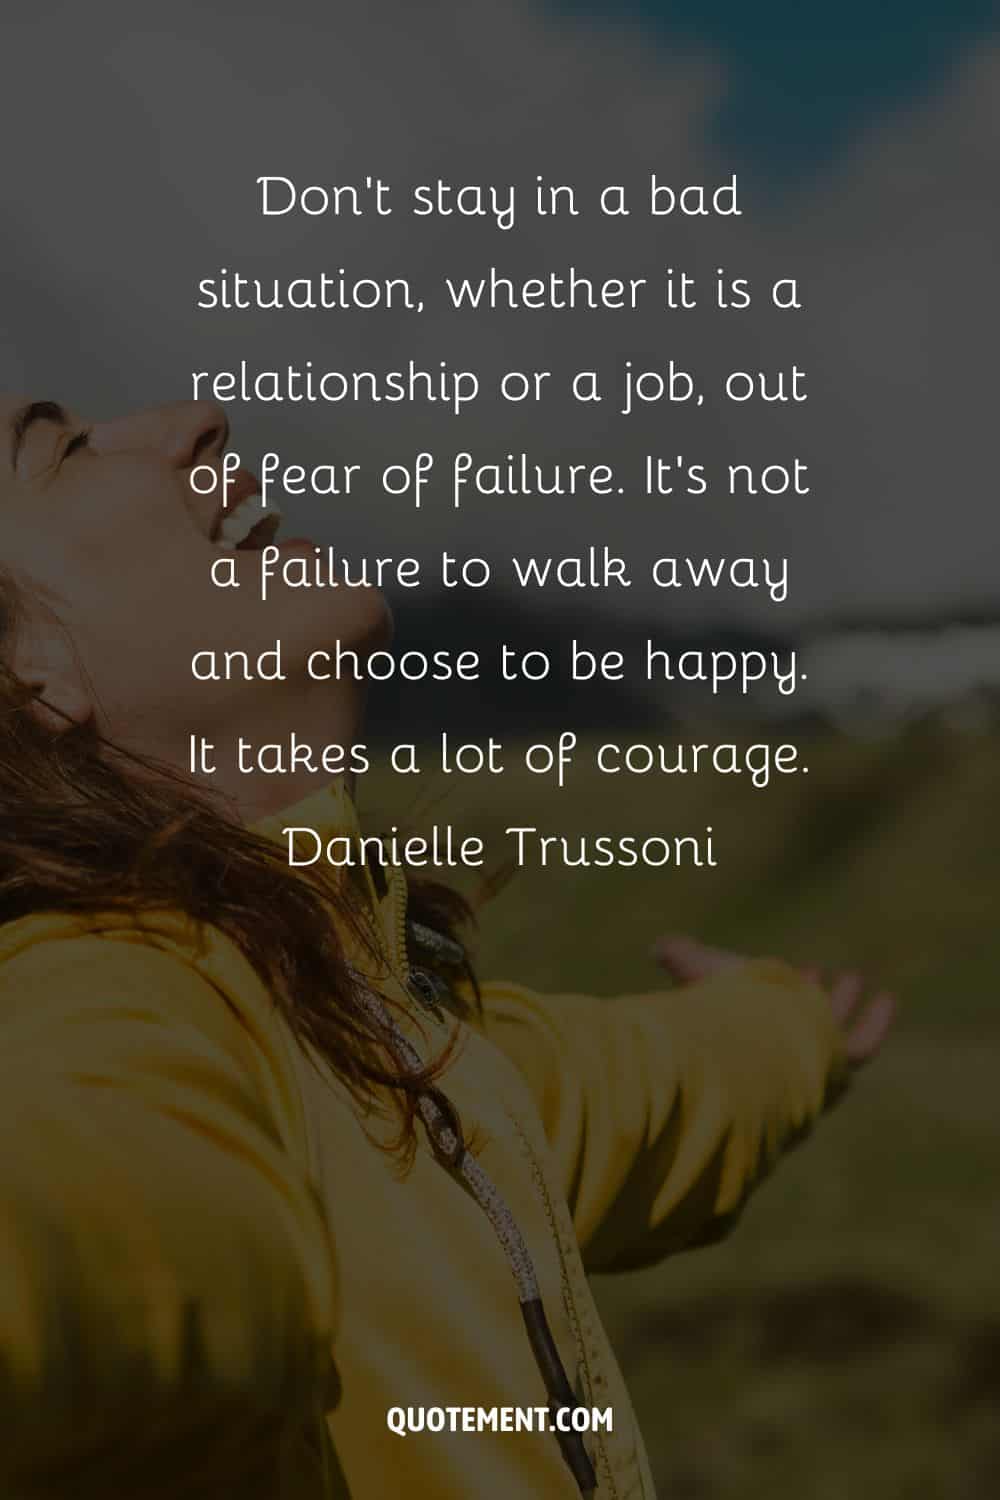 Don't stay in a bad situation, whether it is a relationship or a job, out of fear of failure. It's not a failure to walk away and choose to be happy. It takes a lot of courage.